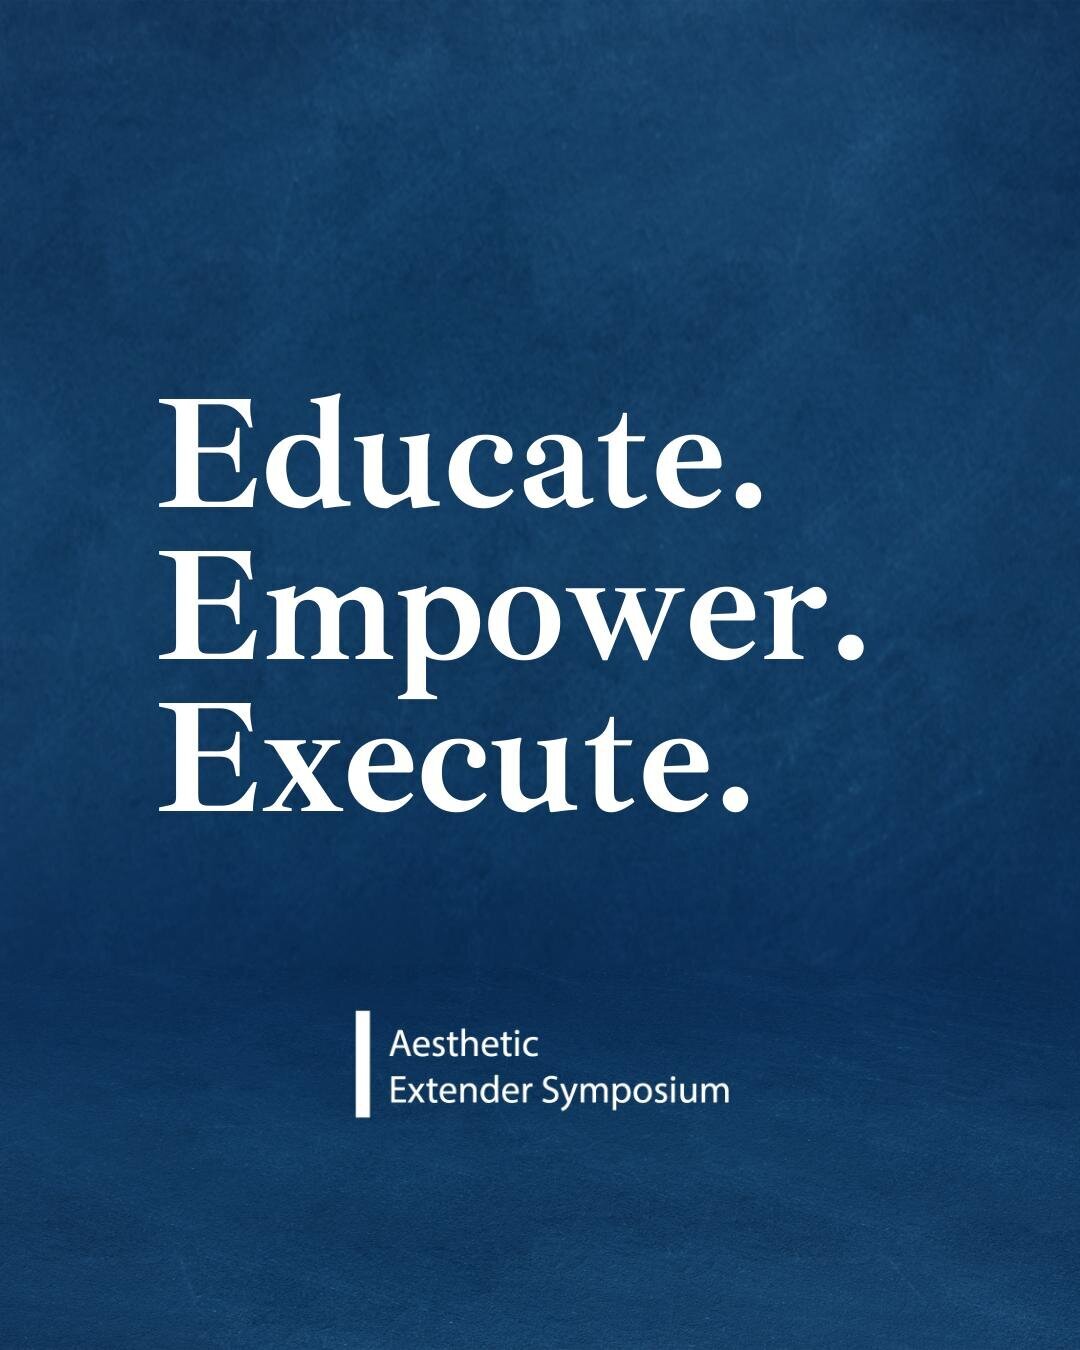 Educate. Empower. Execute